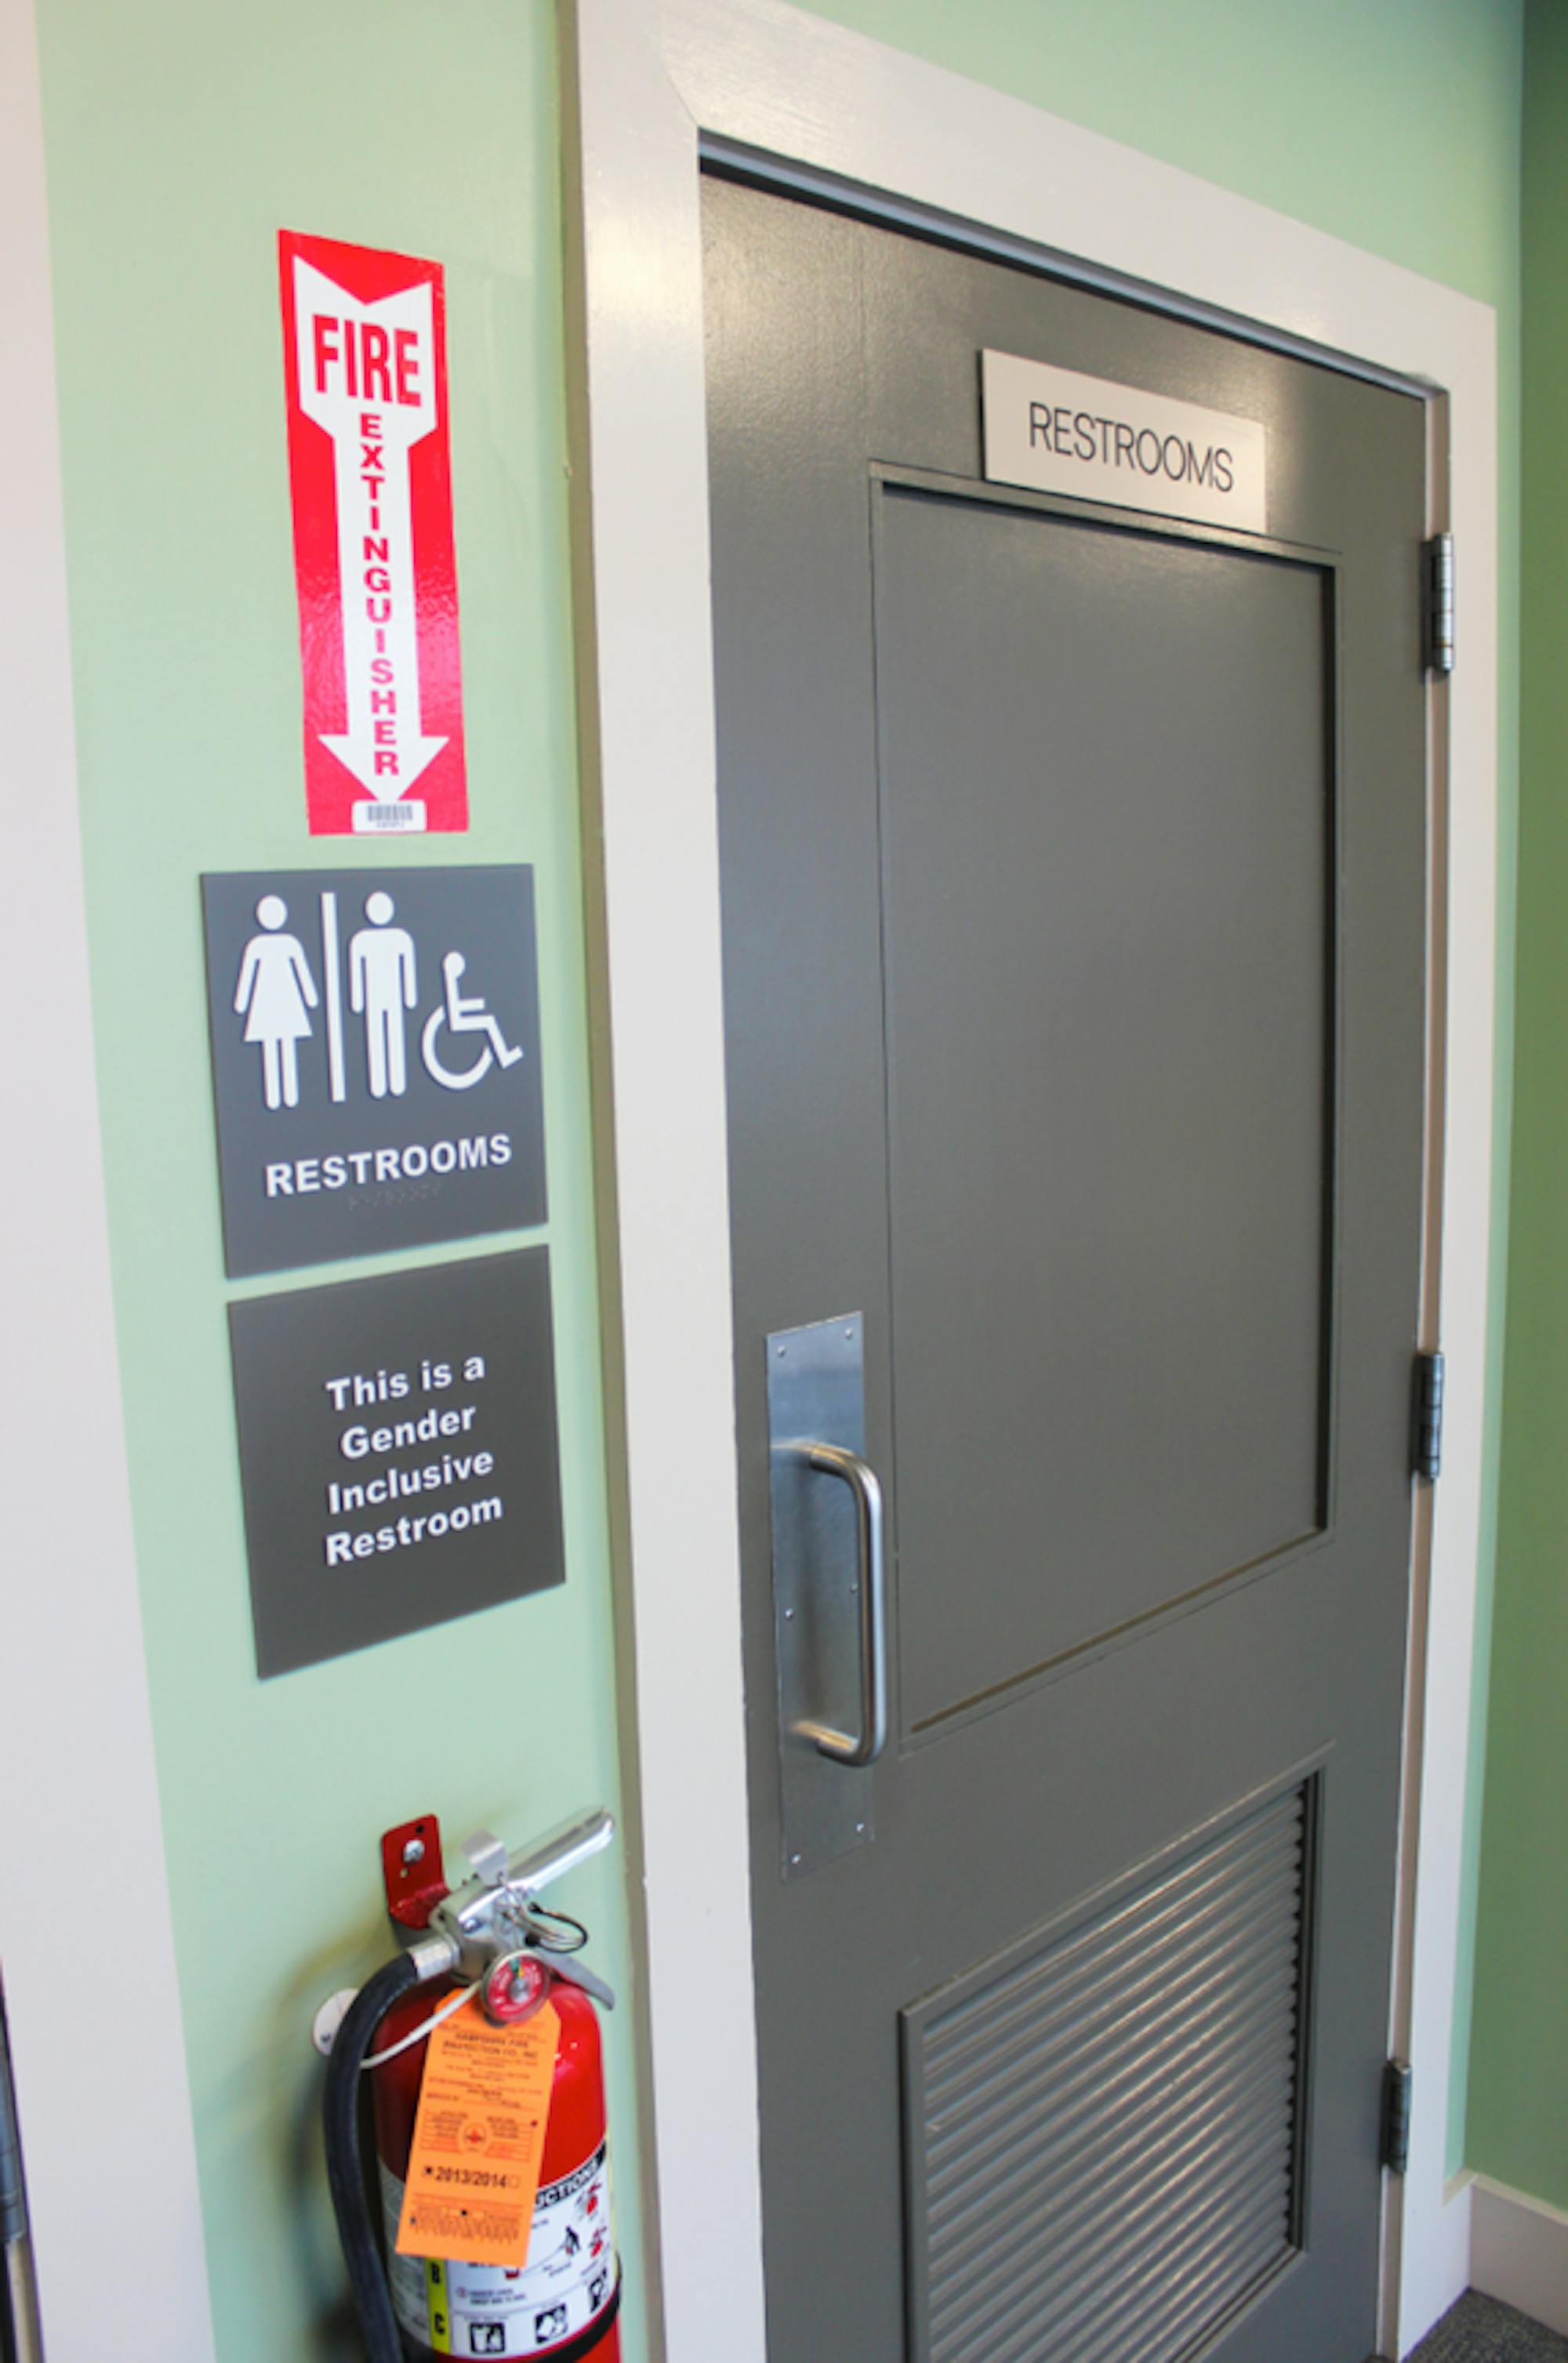 The College will begin installing gender-inclusive restrooms in residence halls.